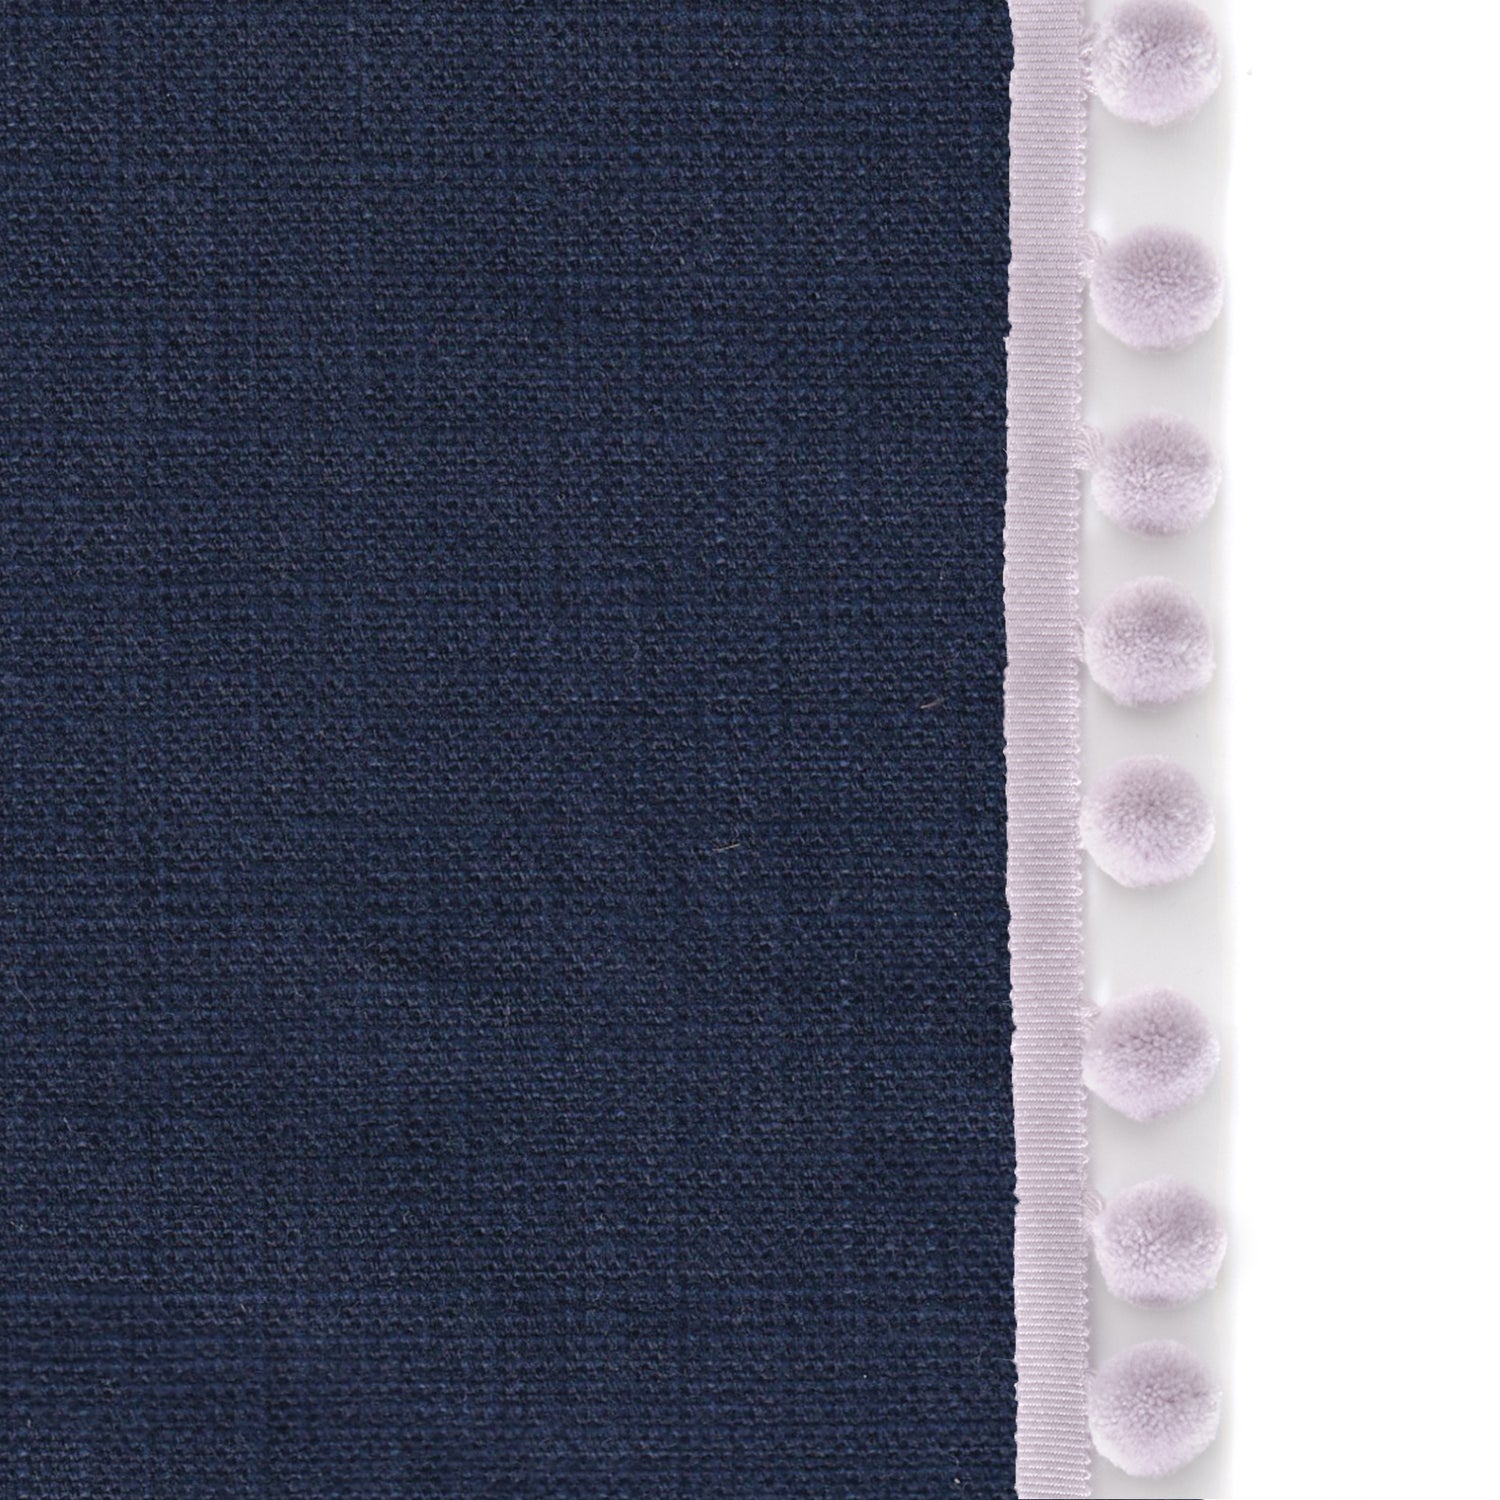 Upclose picture of Midnight custom curtain with lilac pom pom trim